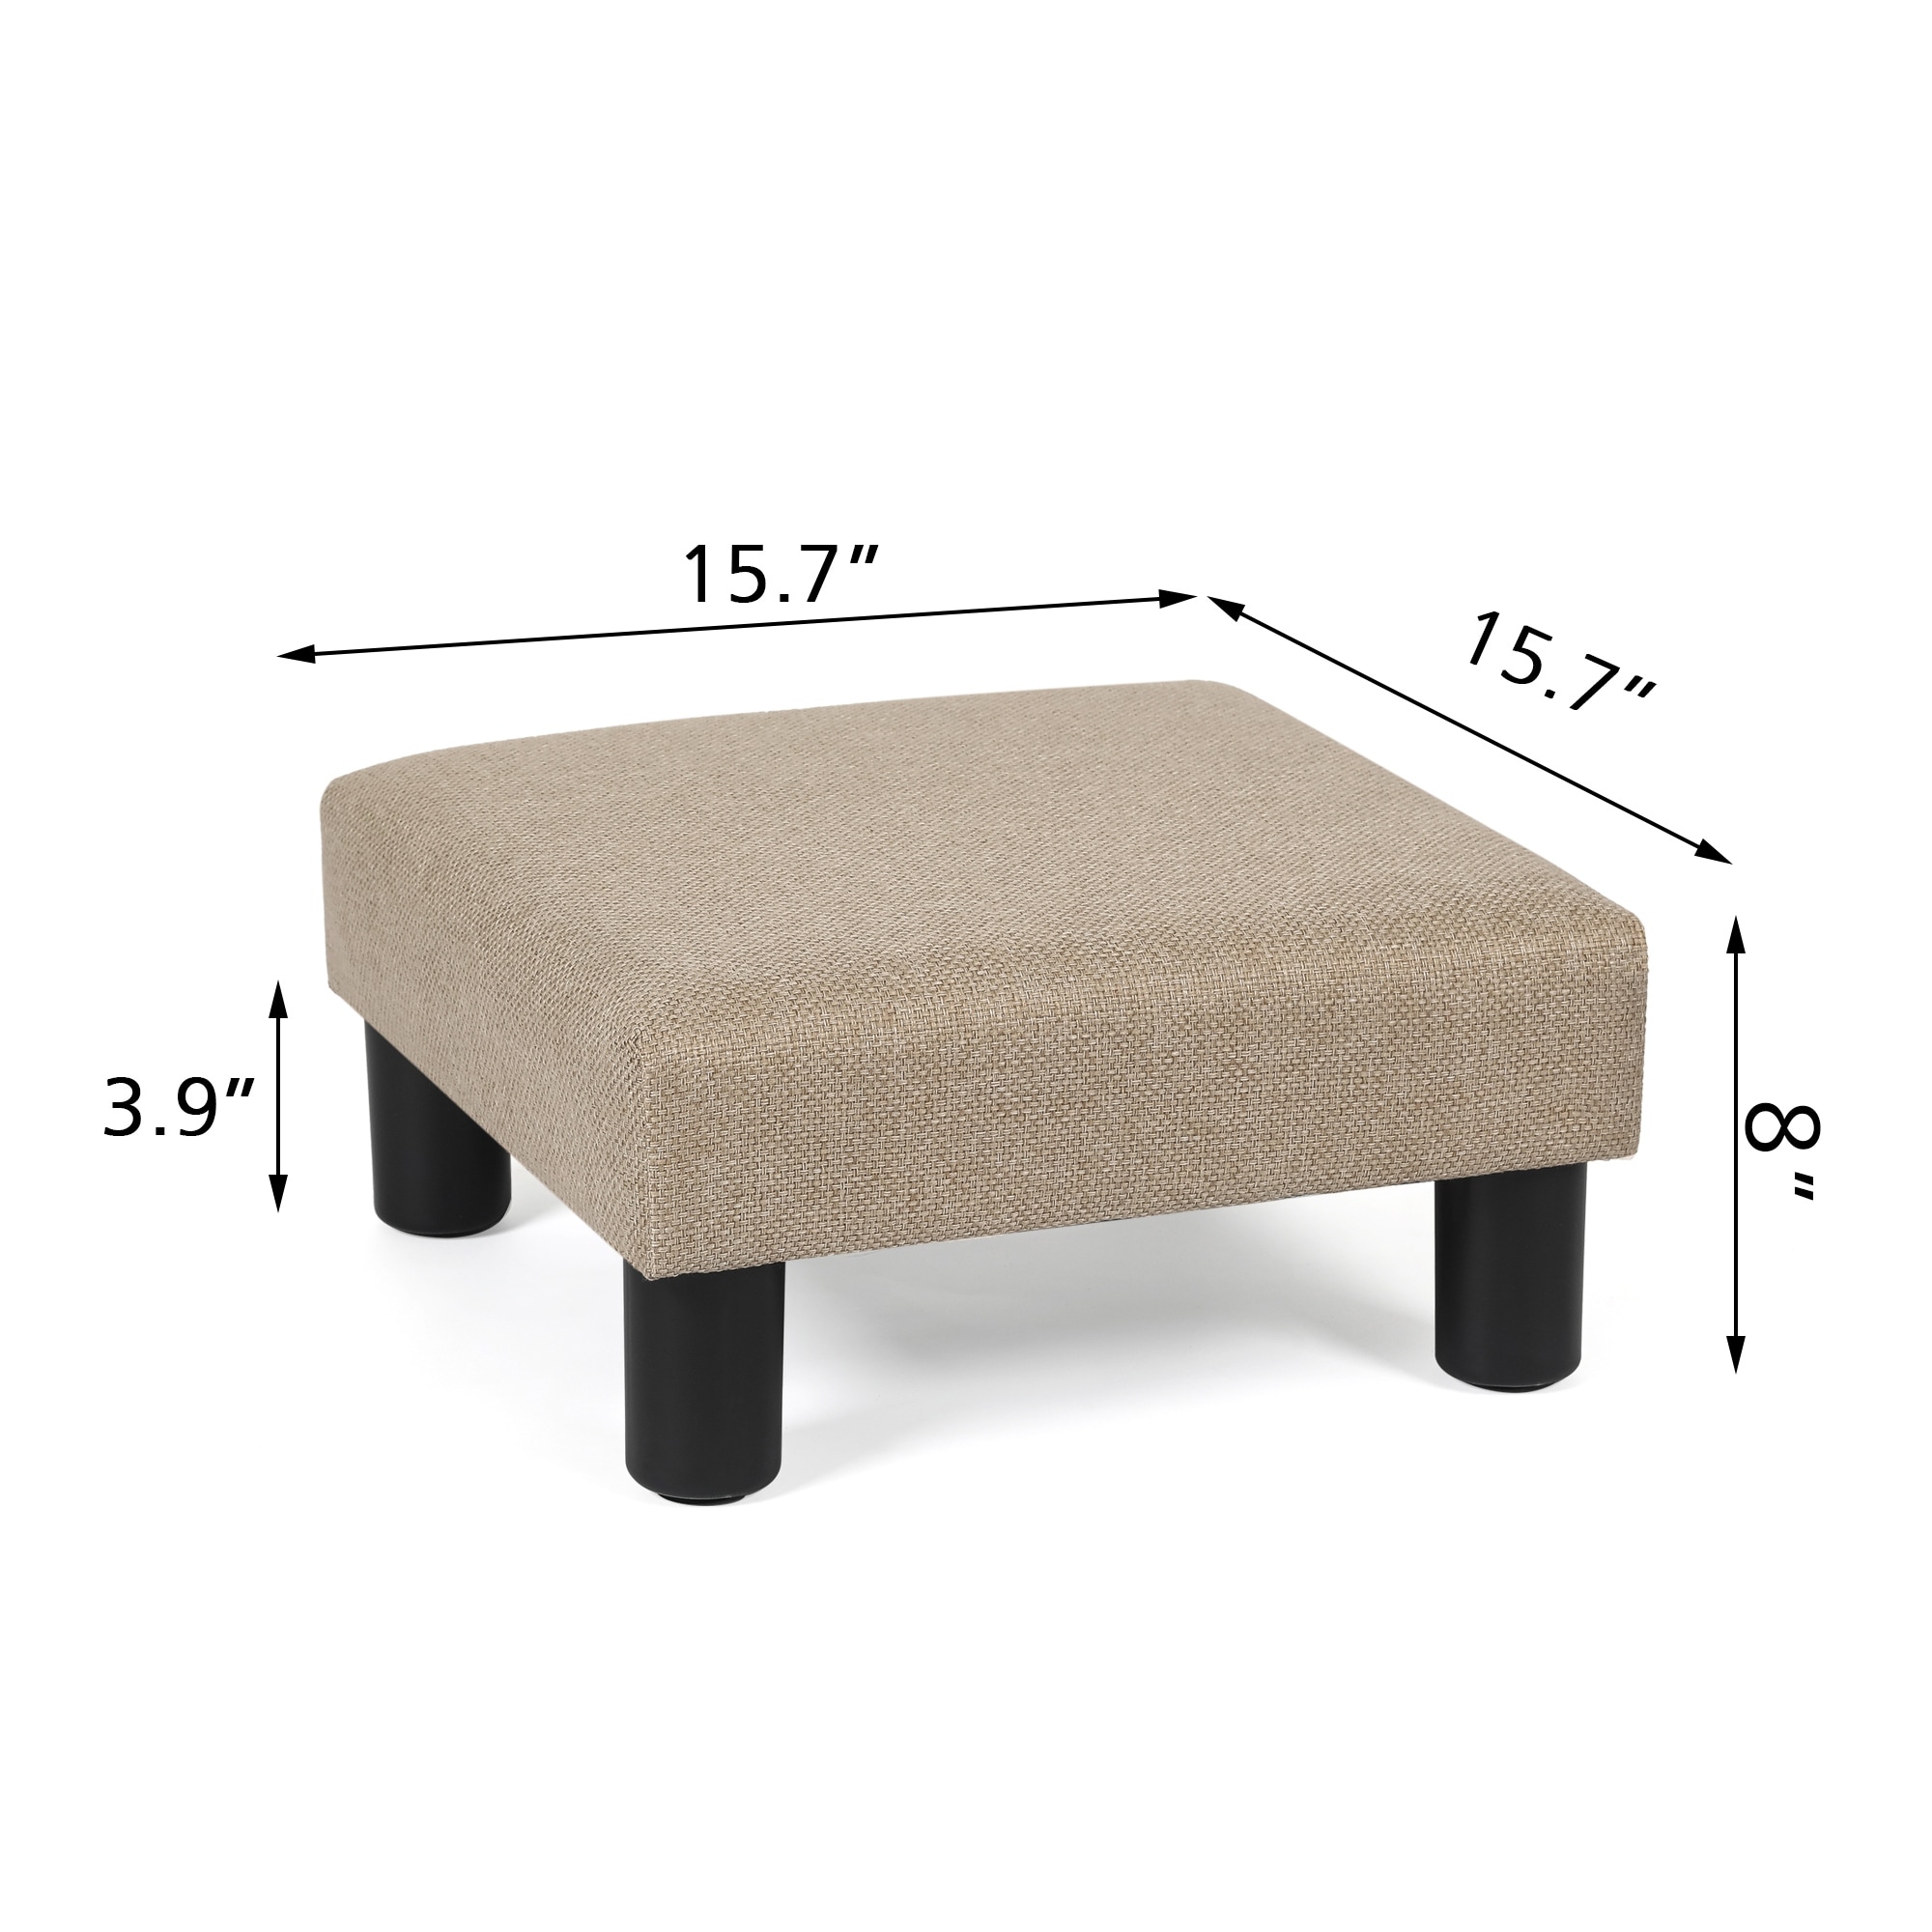 https://ak1.ostkcdn.com/images/products/is/images/direct/35823b85fff68b778d3c1eb2e11df28009dfb6dc/Adeco-Small-Ottoman-Upholstered-Footrest-Pet-Steps-Dog-Stairs-Stool.jpg